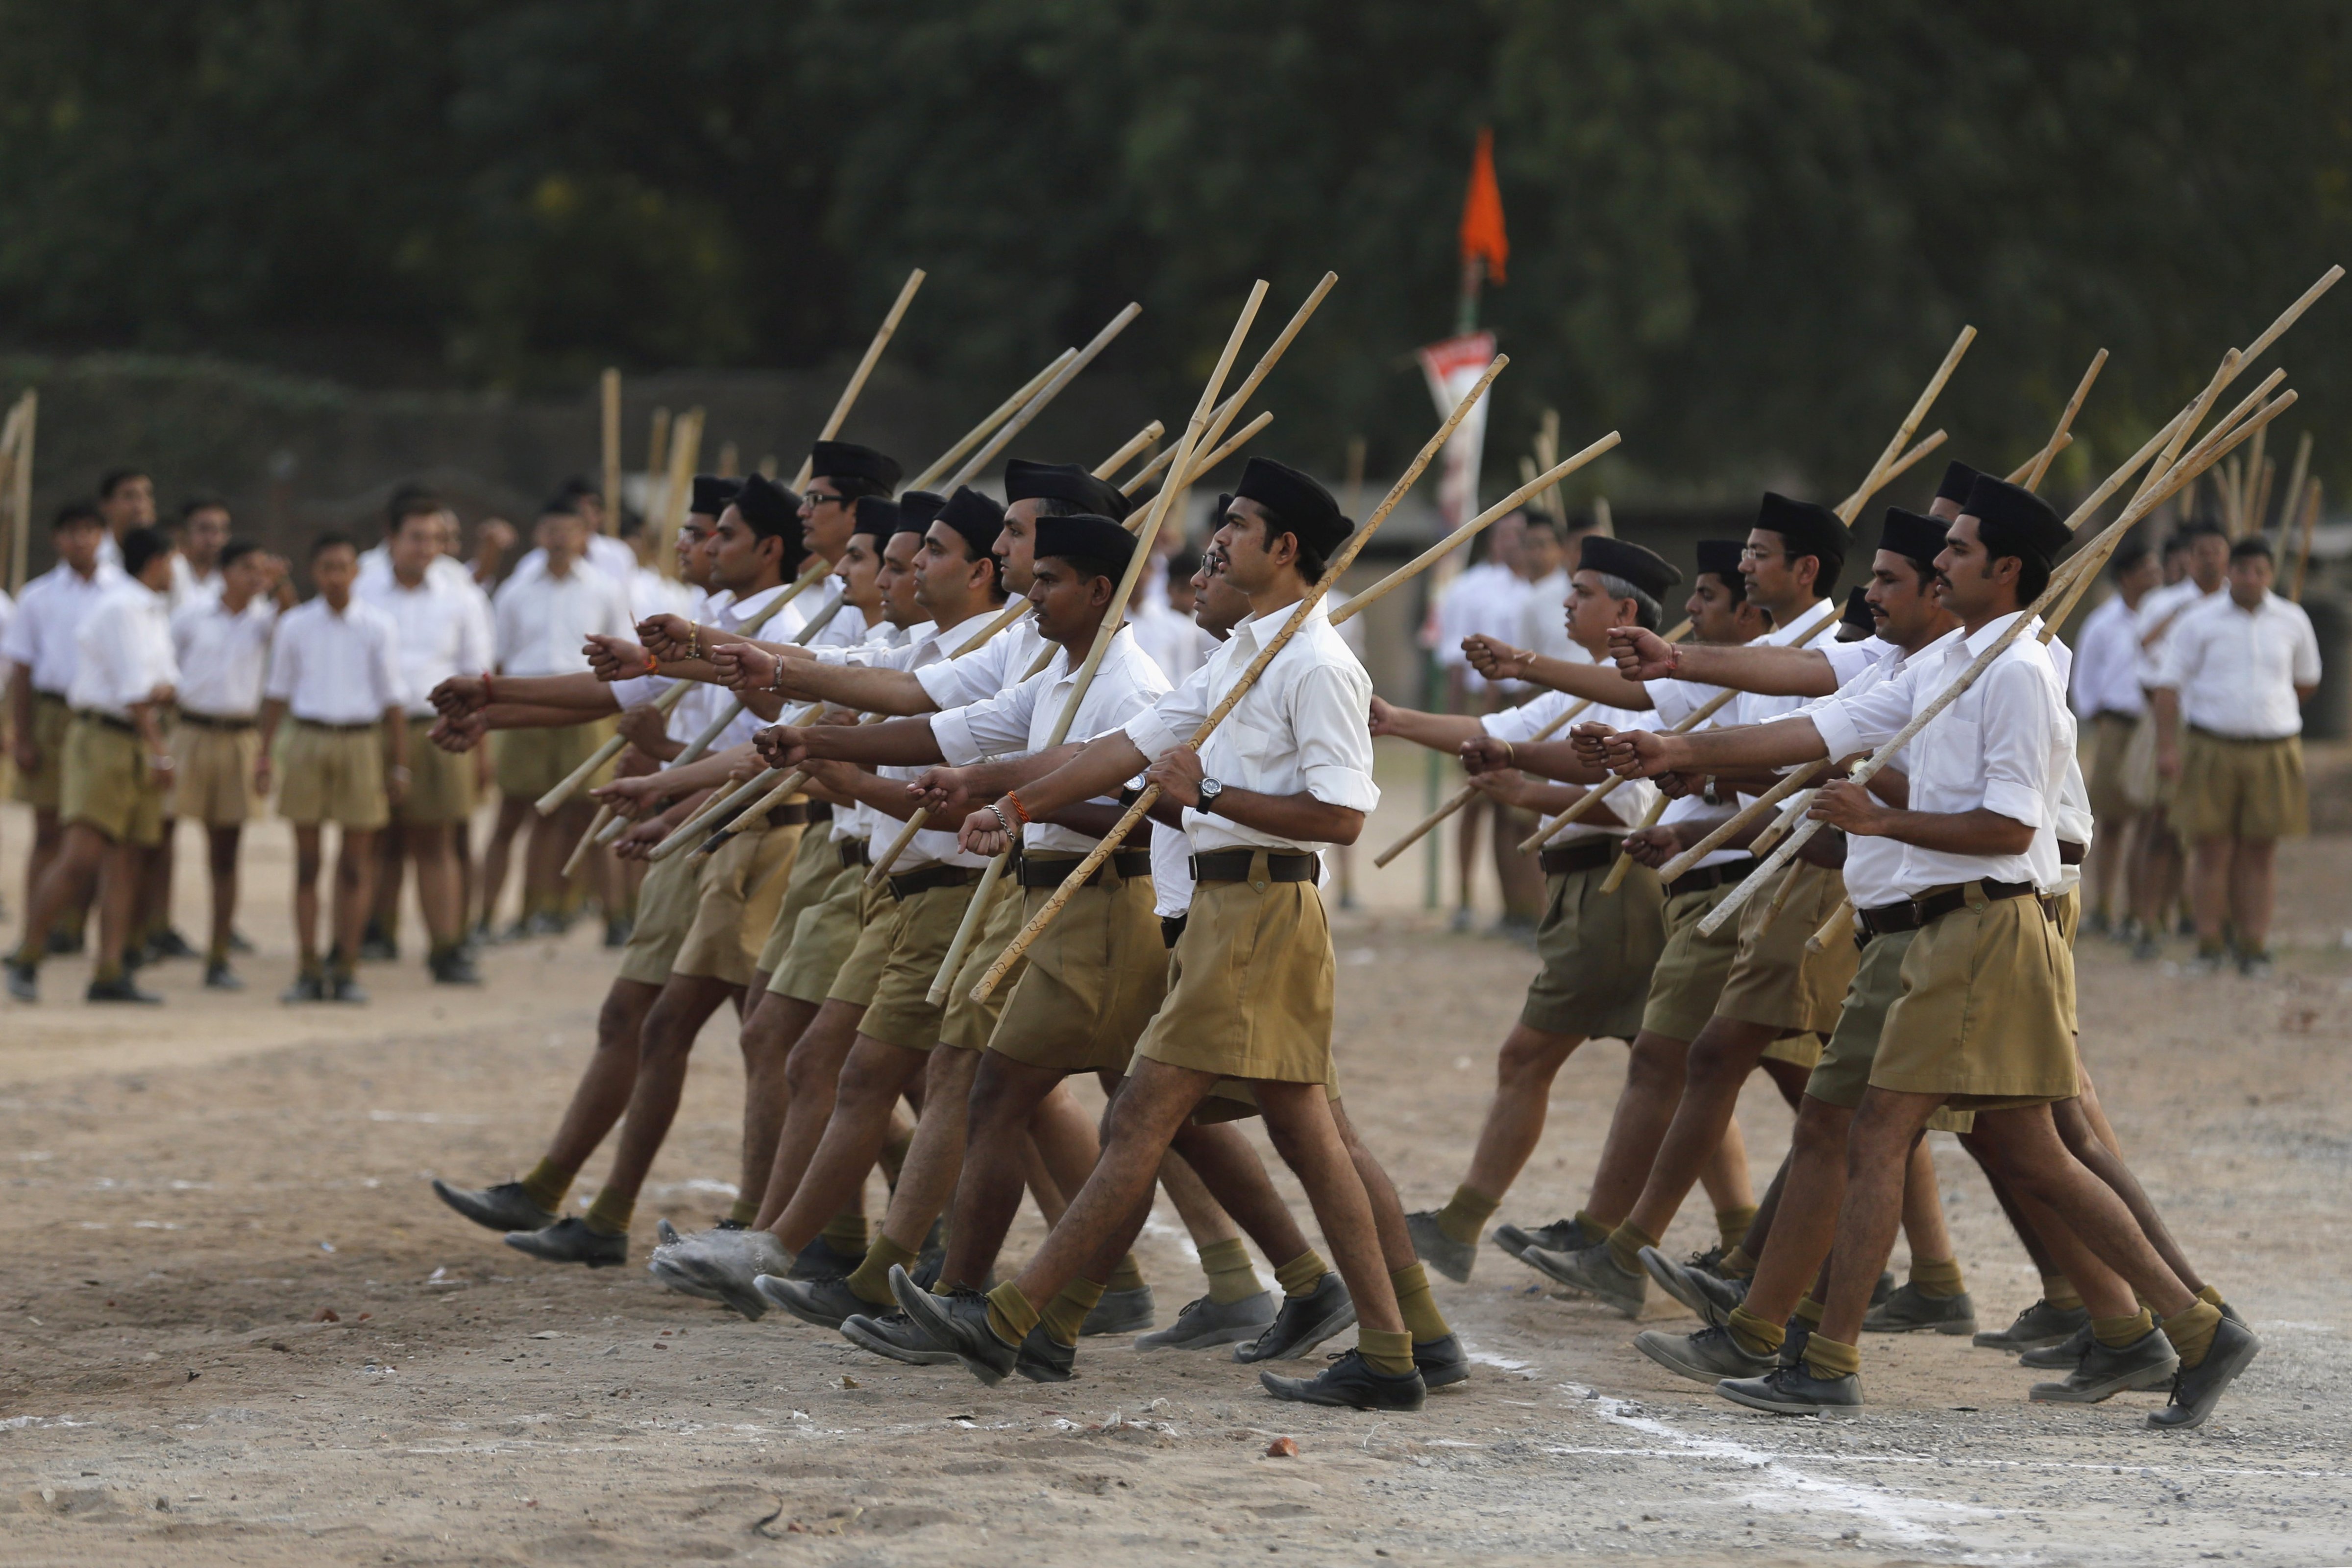 Volunteers of the Hindu nationalist organization Rashtriya Swayamsevak Sangh take part in the <i>Path-Sanchalan</i> (Volunteer March) during celebrations to mark the festival of Dussehra in Ahmedabad, India, on Oct. 18, 2015 (Amit Dave—Reuters)